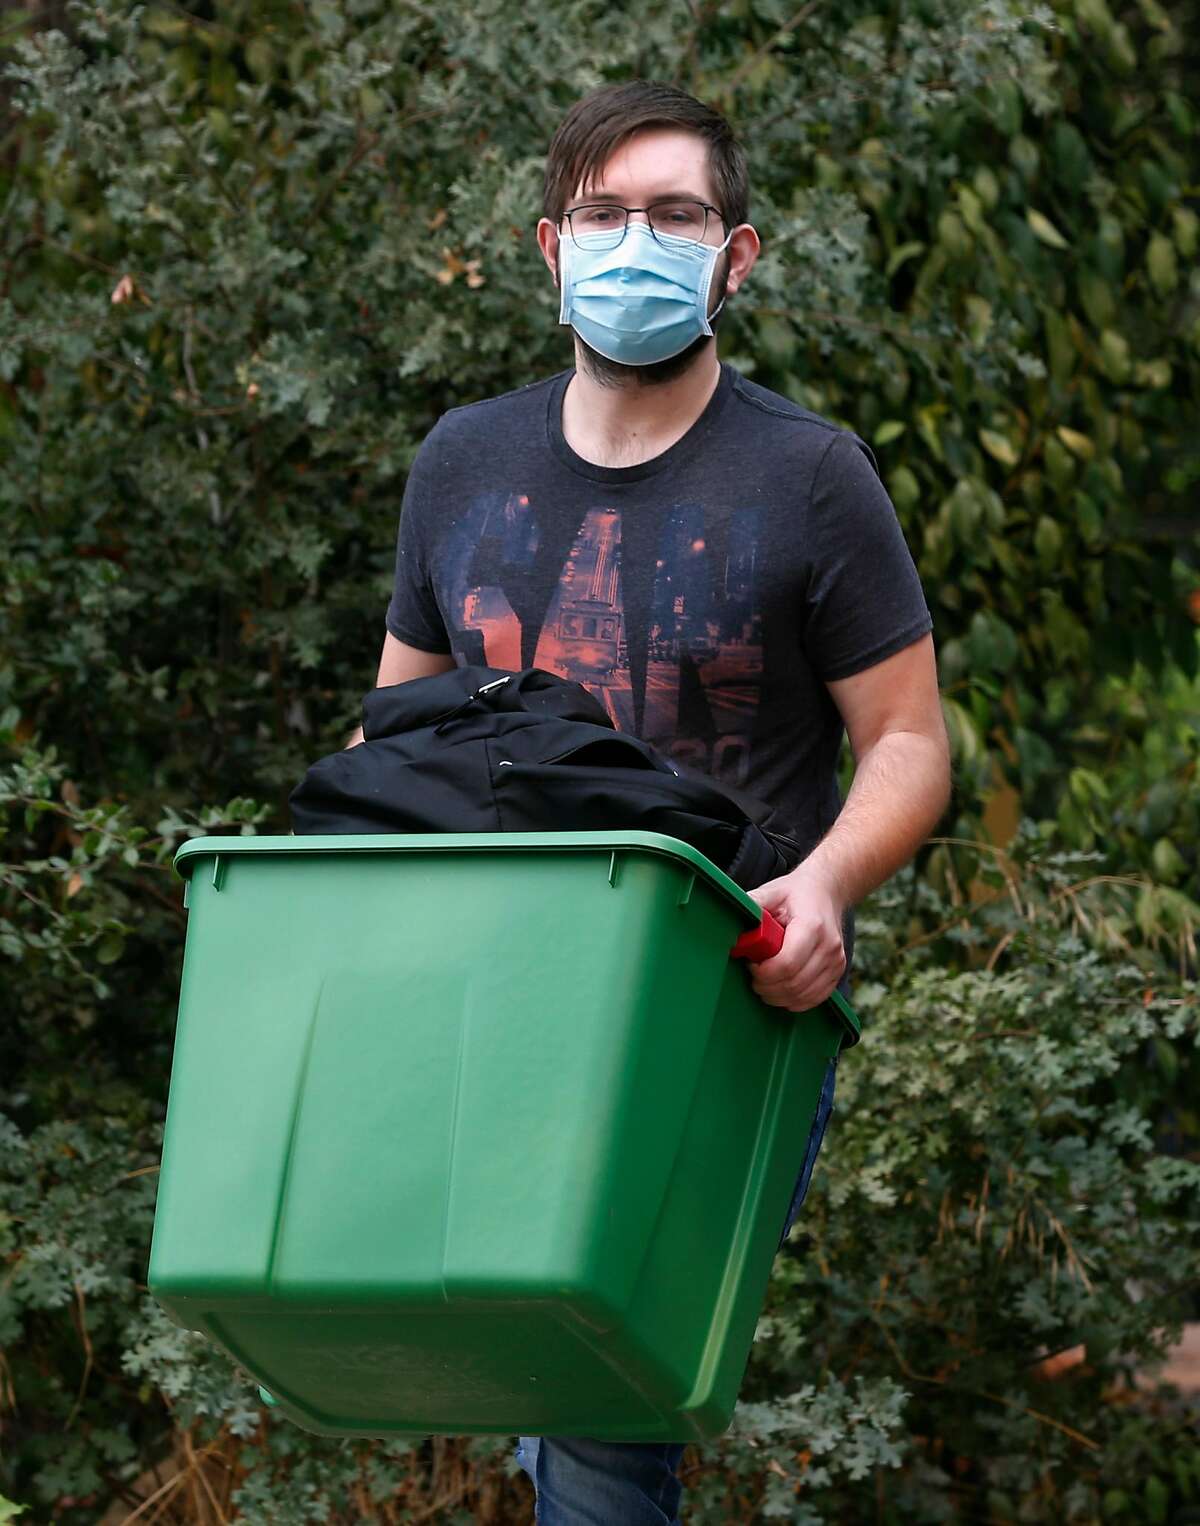 Bobby Hougen carries his emergency go kit from his home to review its contents in Santa Rosa, Calif. on Thursday, Oct. 1, 2020. Hougen has grown tired of always being on alert and ready to evacuate after years of wildfires and is planning to move out of the area.